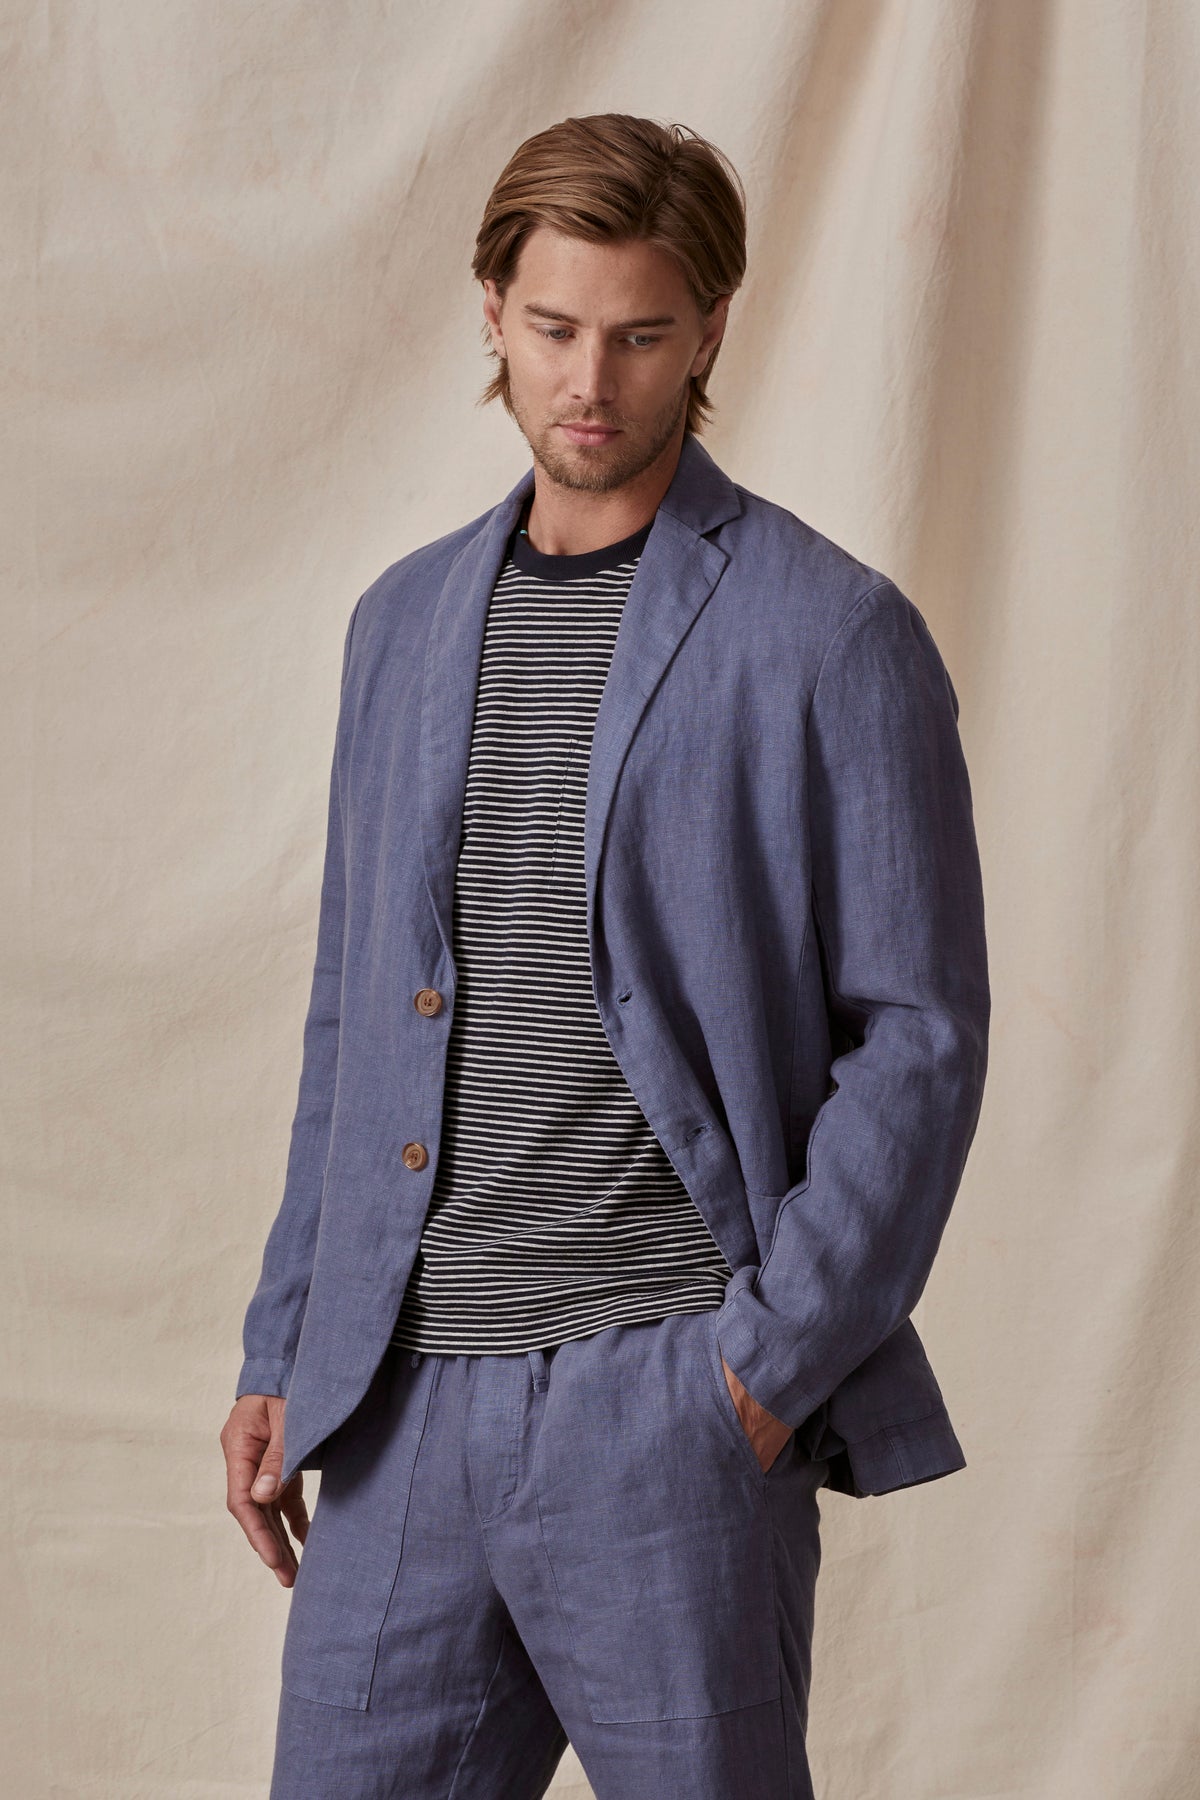 A man in a stylish blue Velvet by Graham & Spencer Joshua linen blazer and striped shirt, standing with hands in pockets against a neutral backdrop.-36805484839105